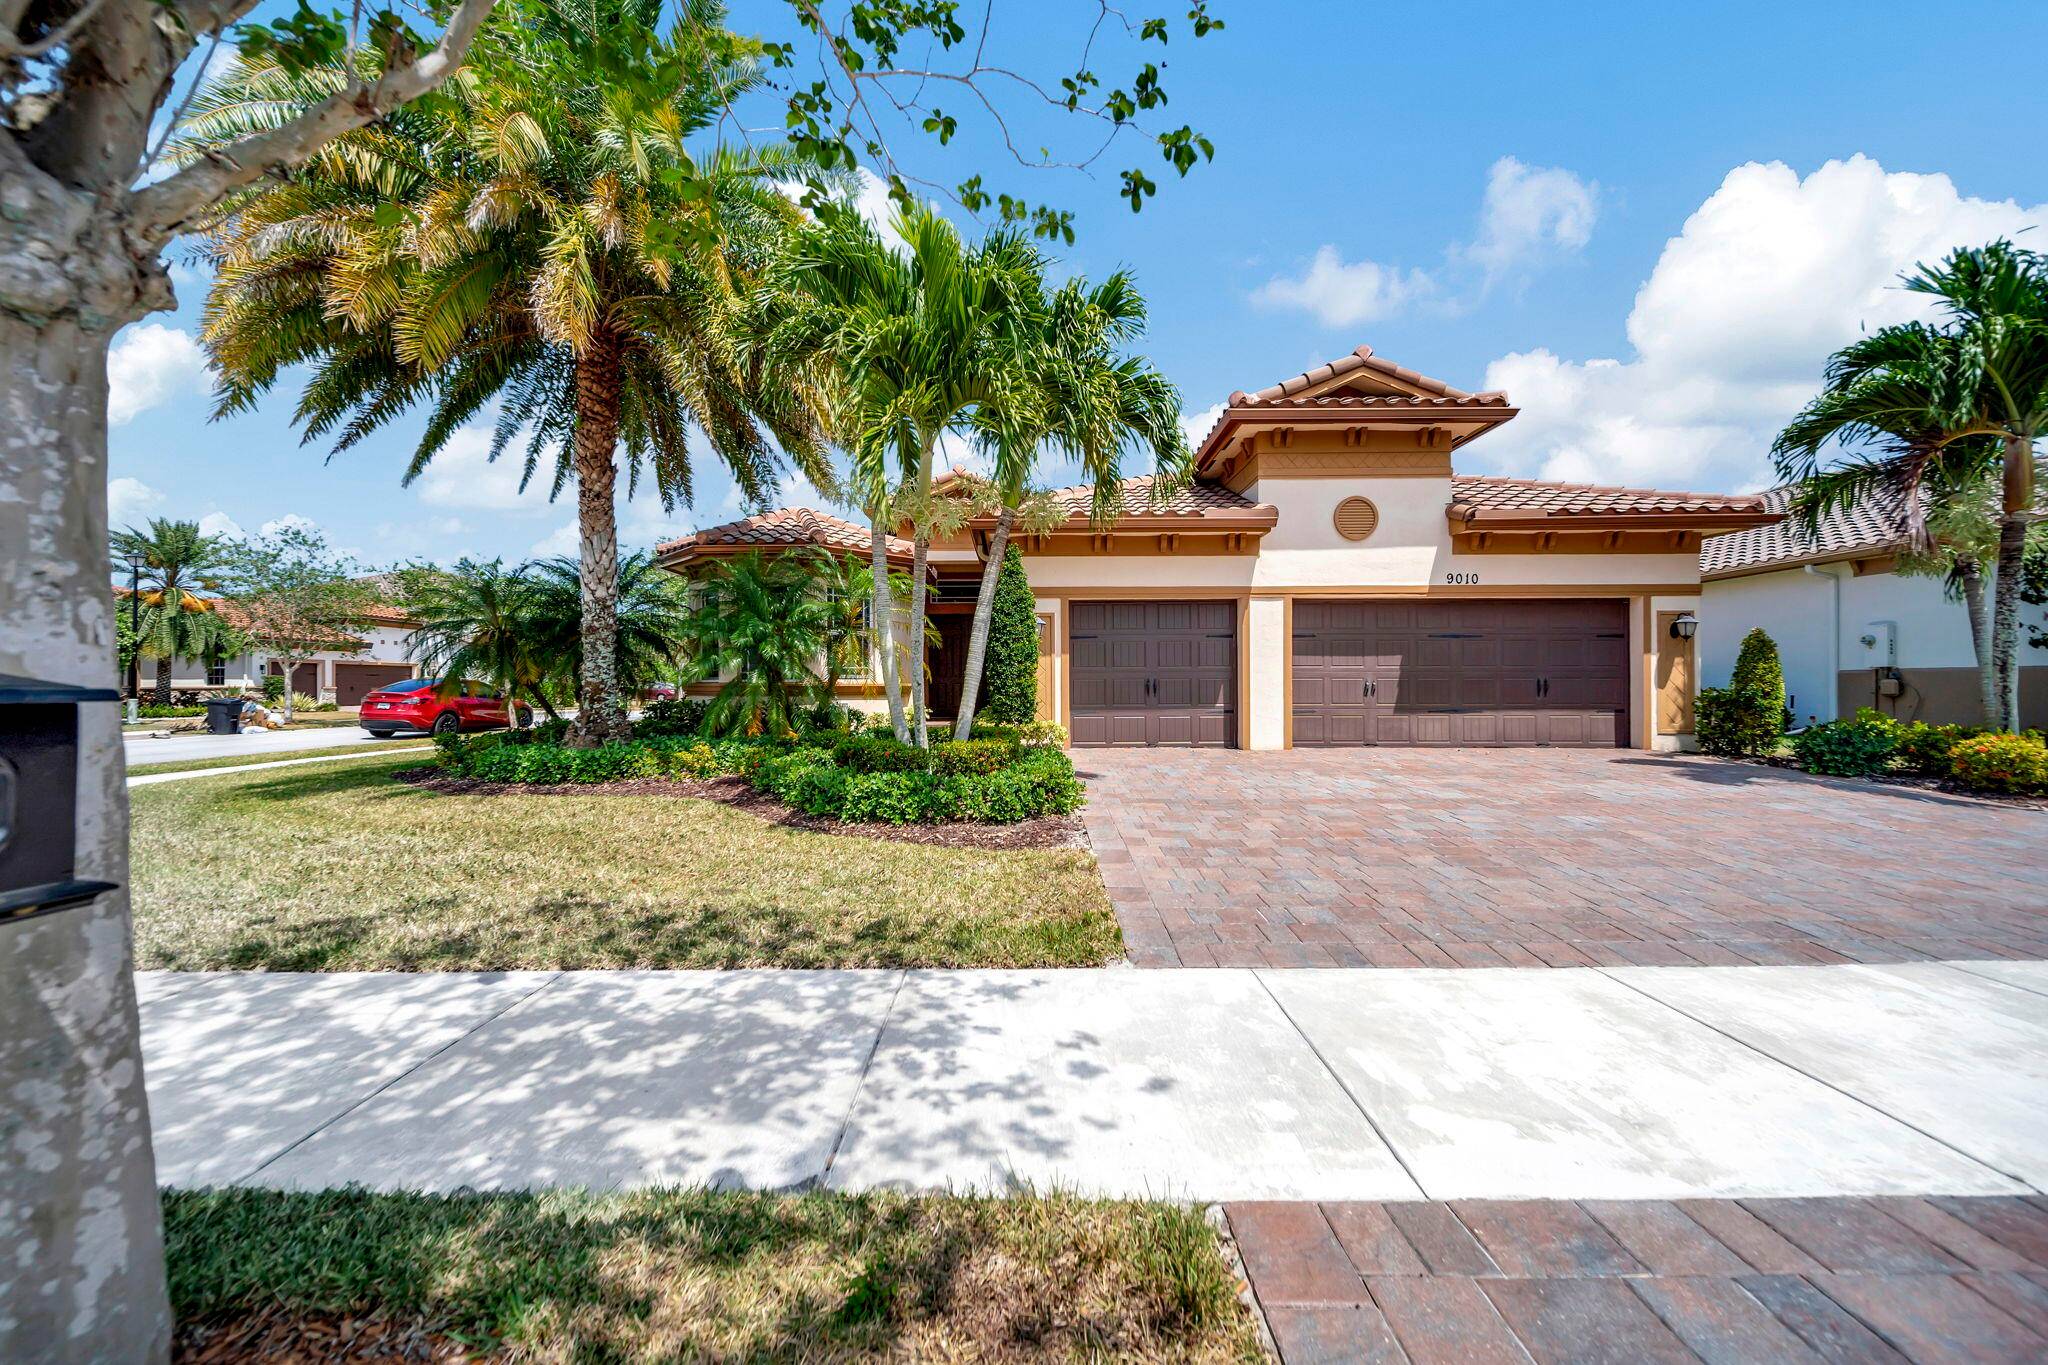 This stunning four bedroom house is located in the prestigious community of Mira Lago in Parkland, Florida.